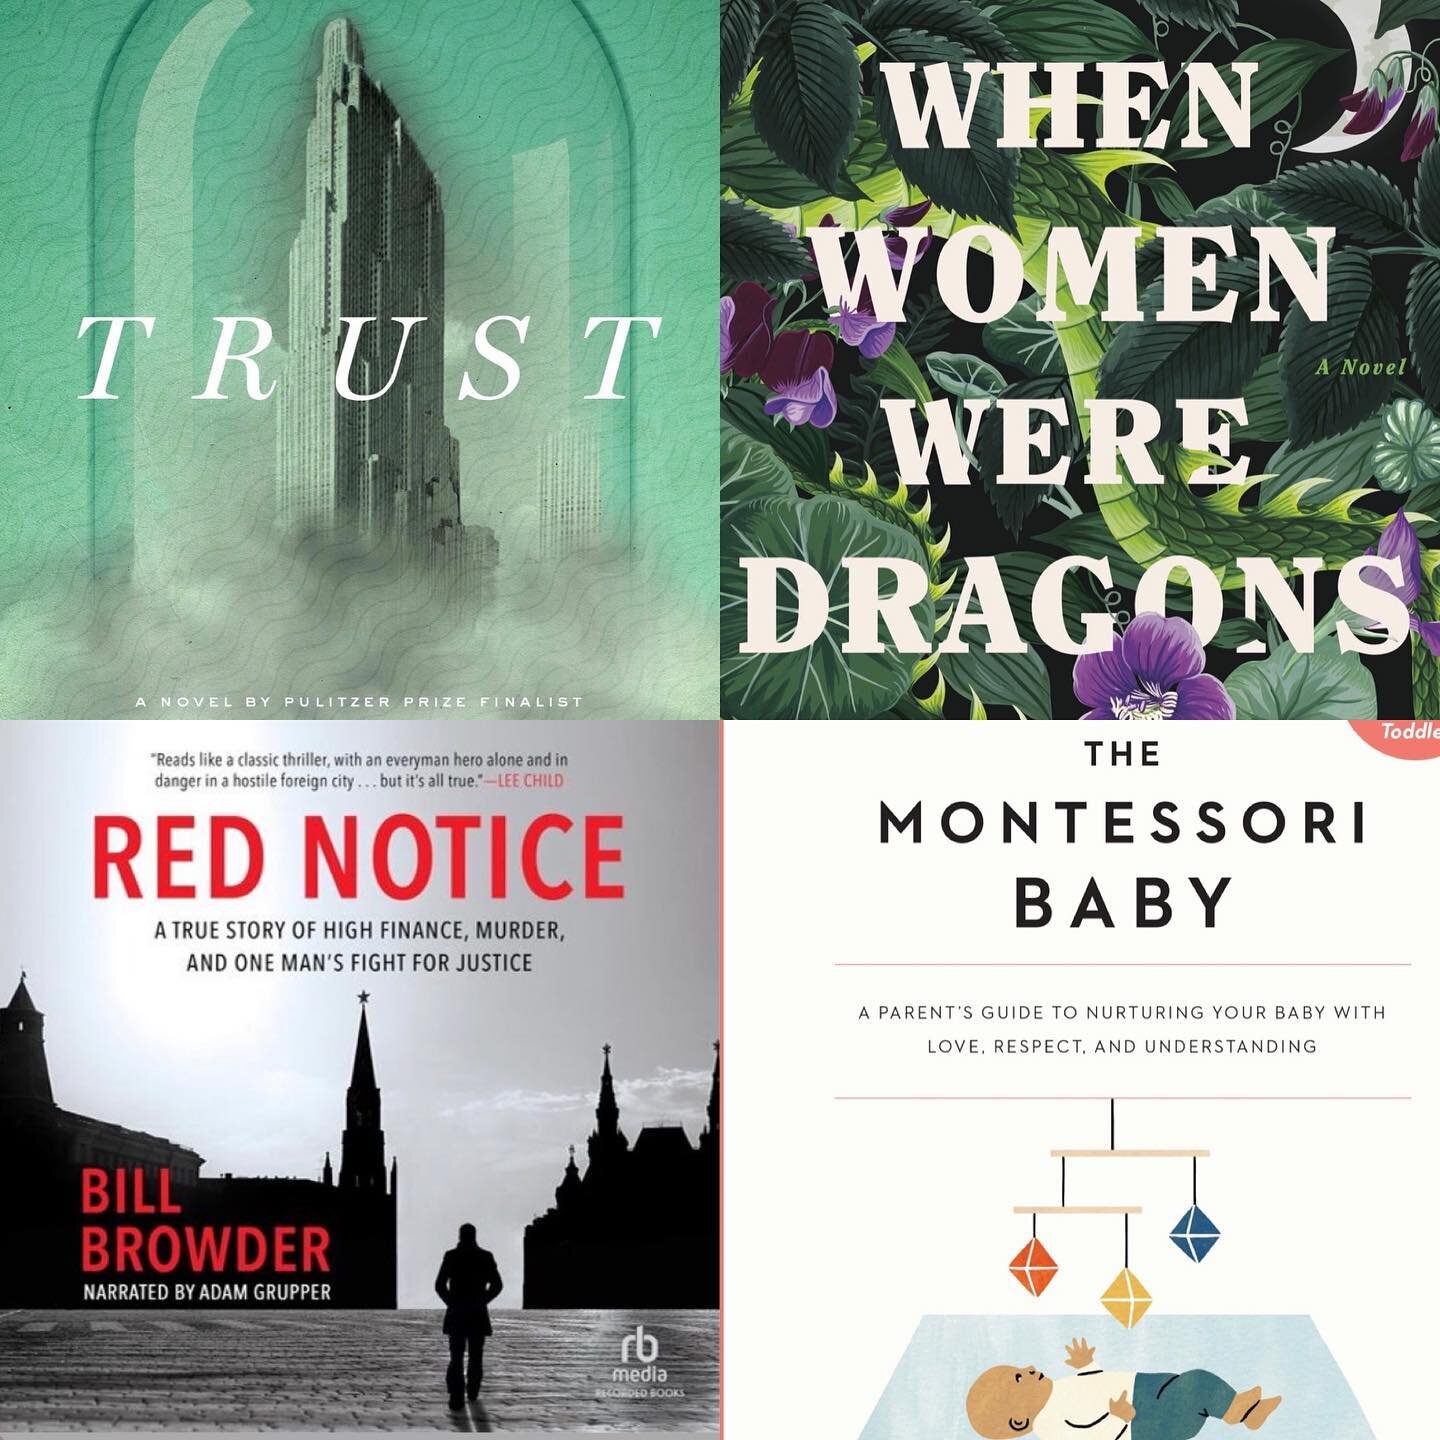 I had a lot of family visits in October (yay!) so didn&rsquo;t get much of a chance to read. But, the two fiction books I read (Trust and When Women Were Dragons) were FANTASTIC so there&rsquo;s that!